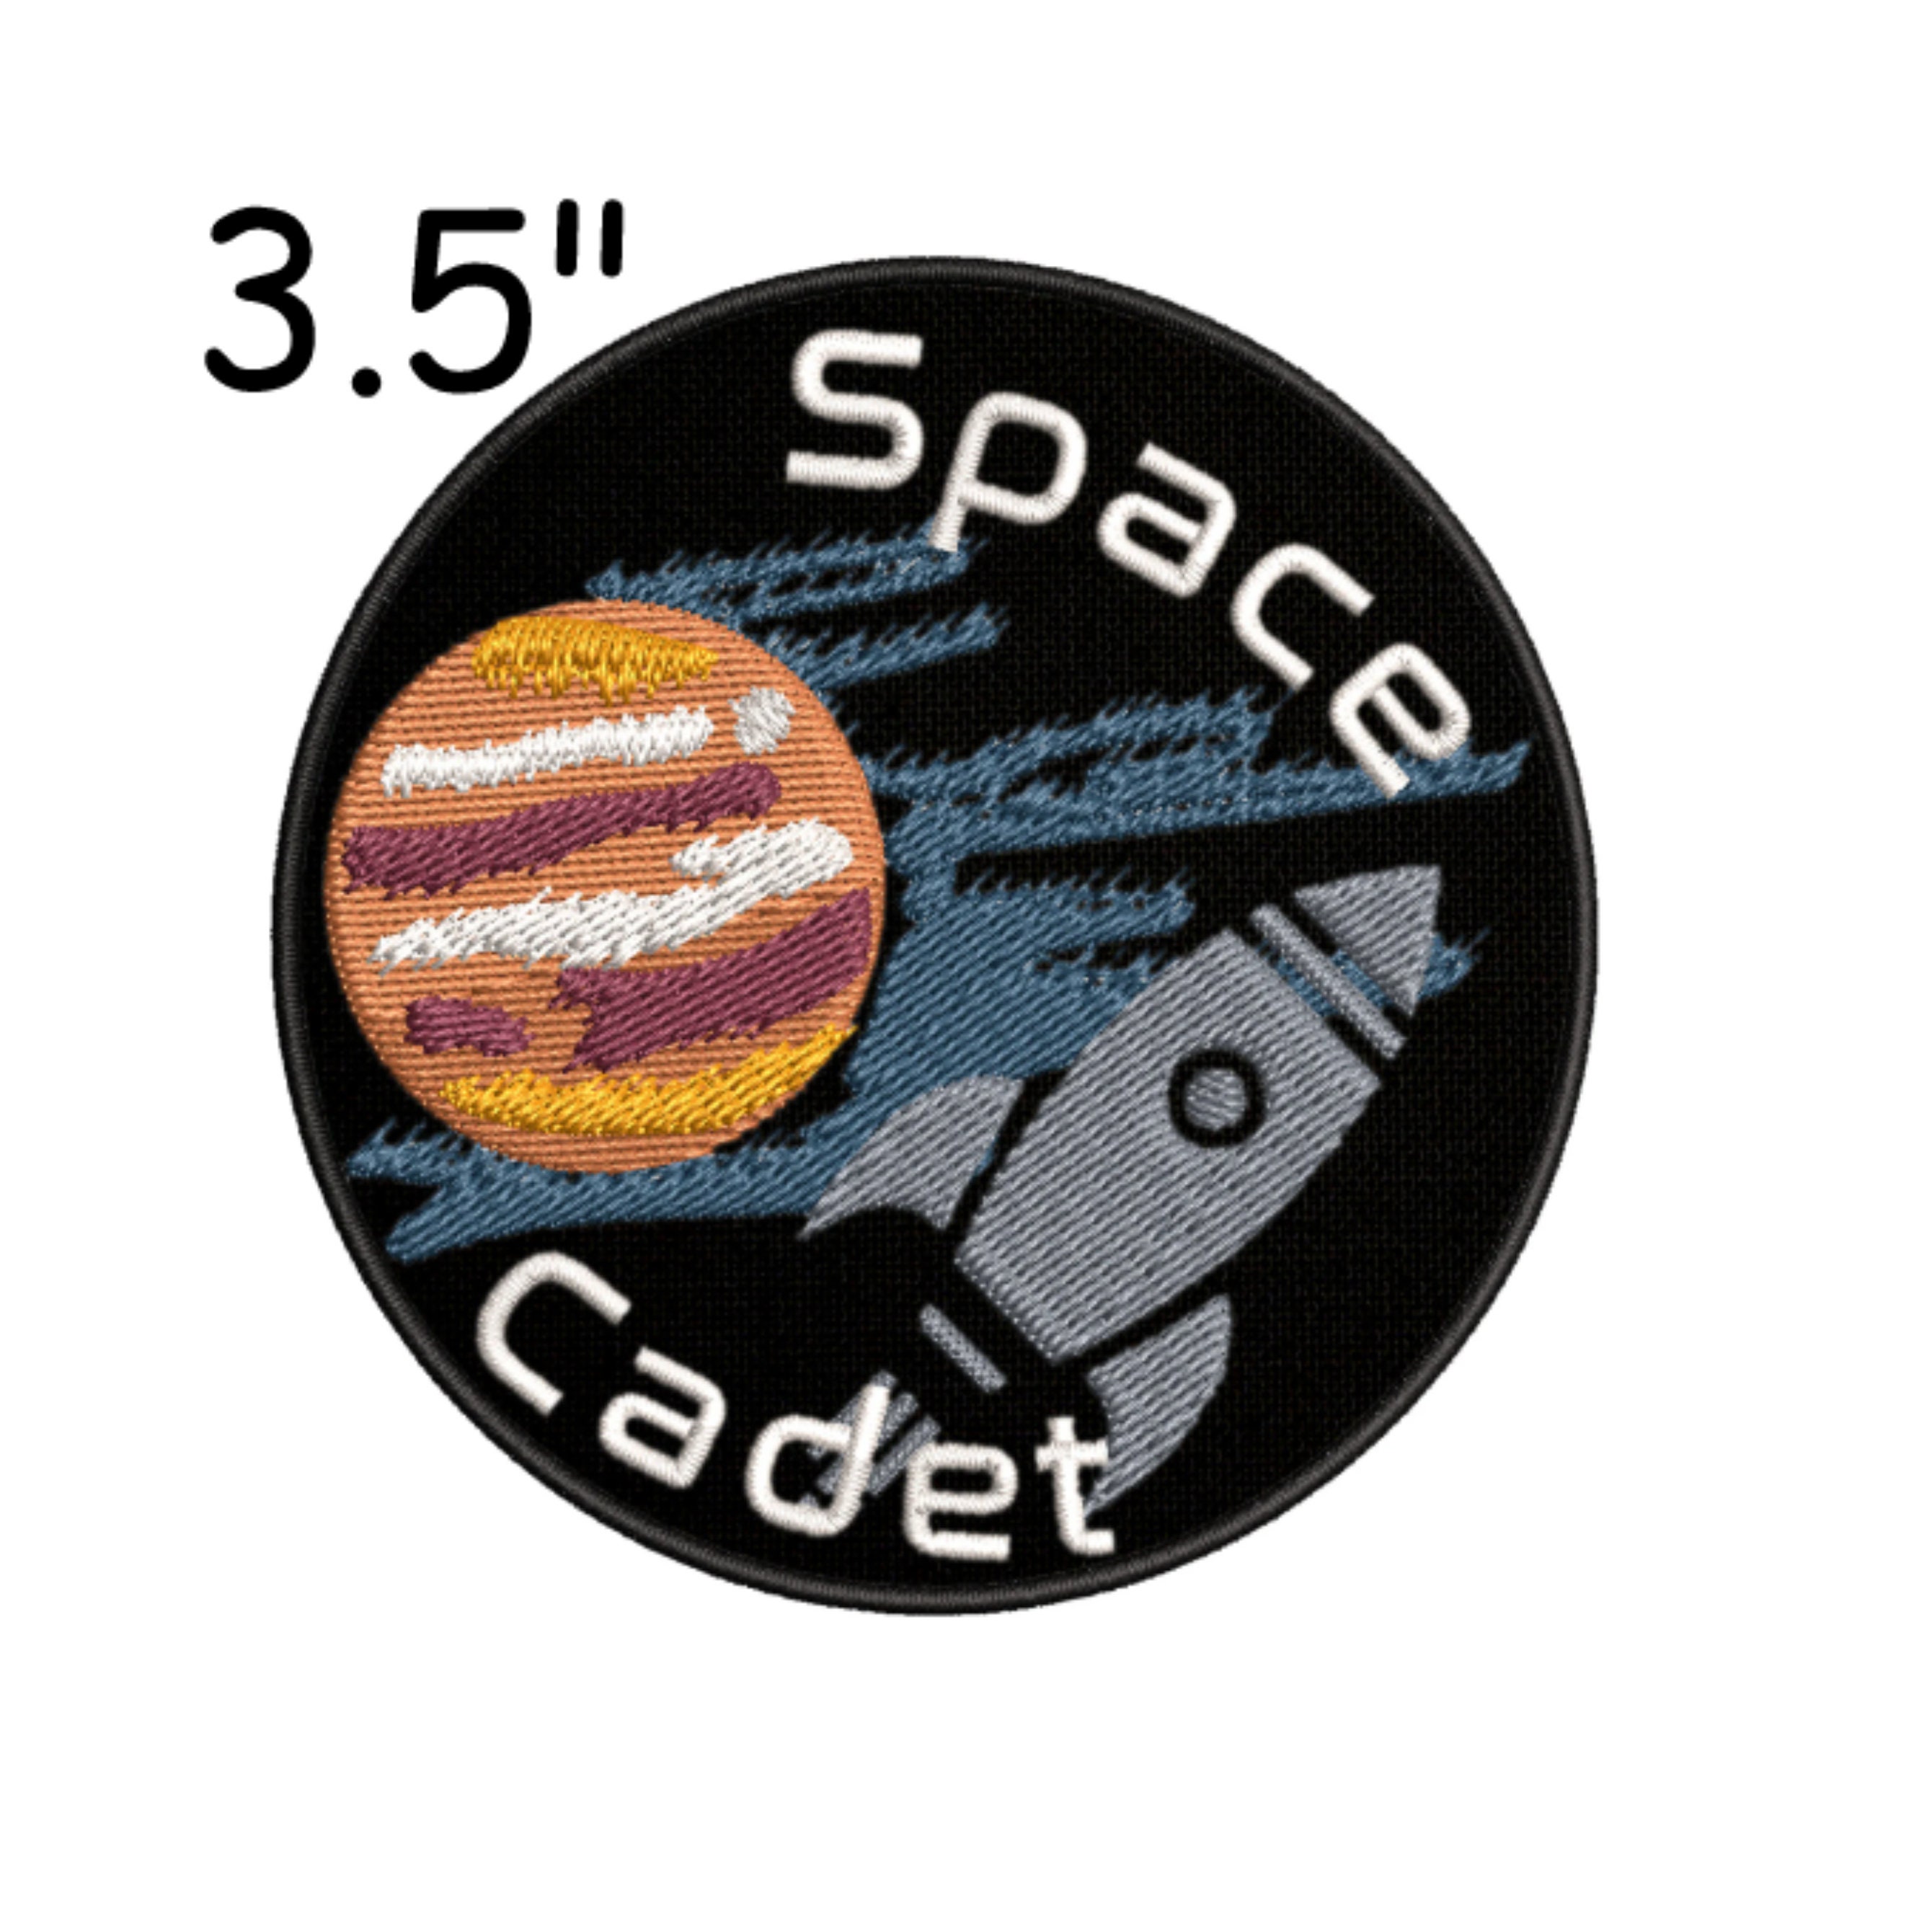 Space Cadet Patch Planet Rocket Stars Embroidered DIY Iron-on